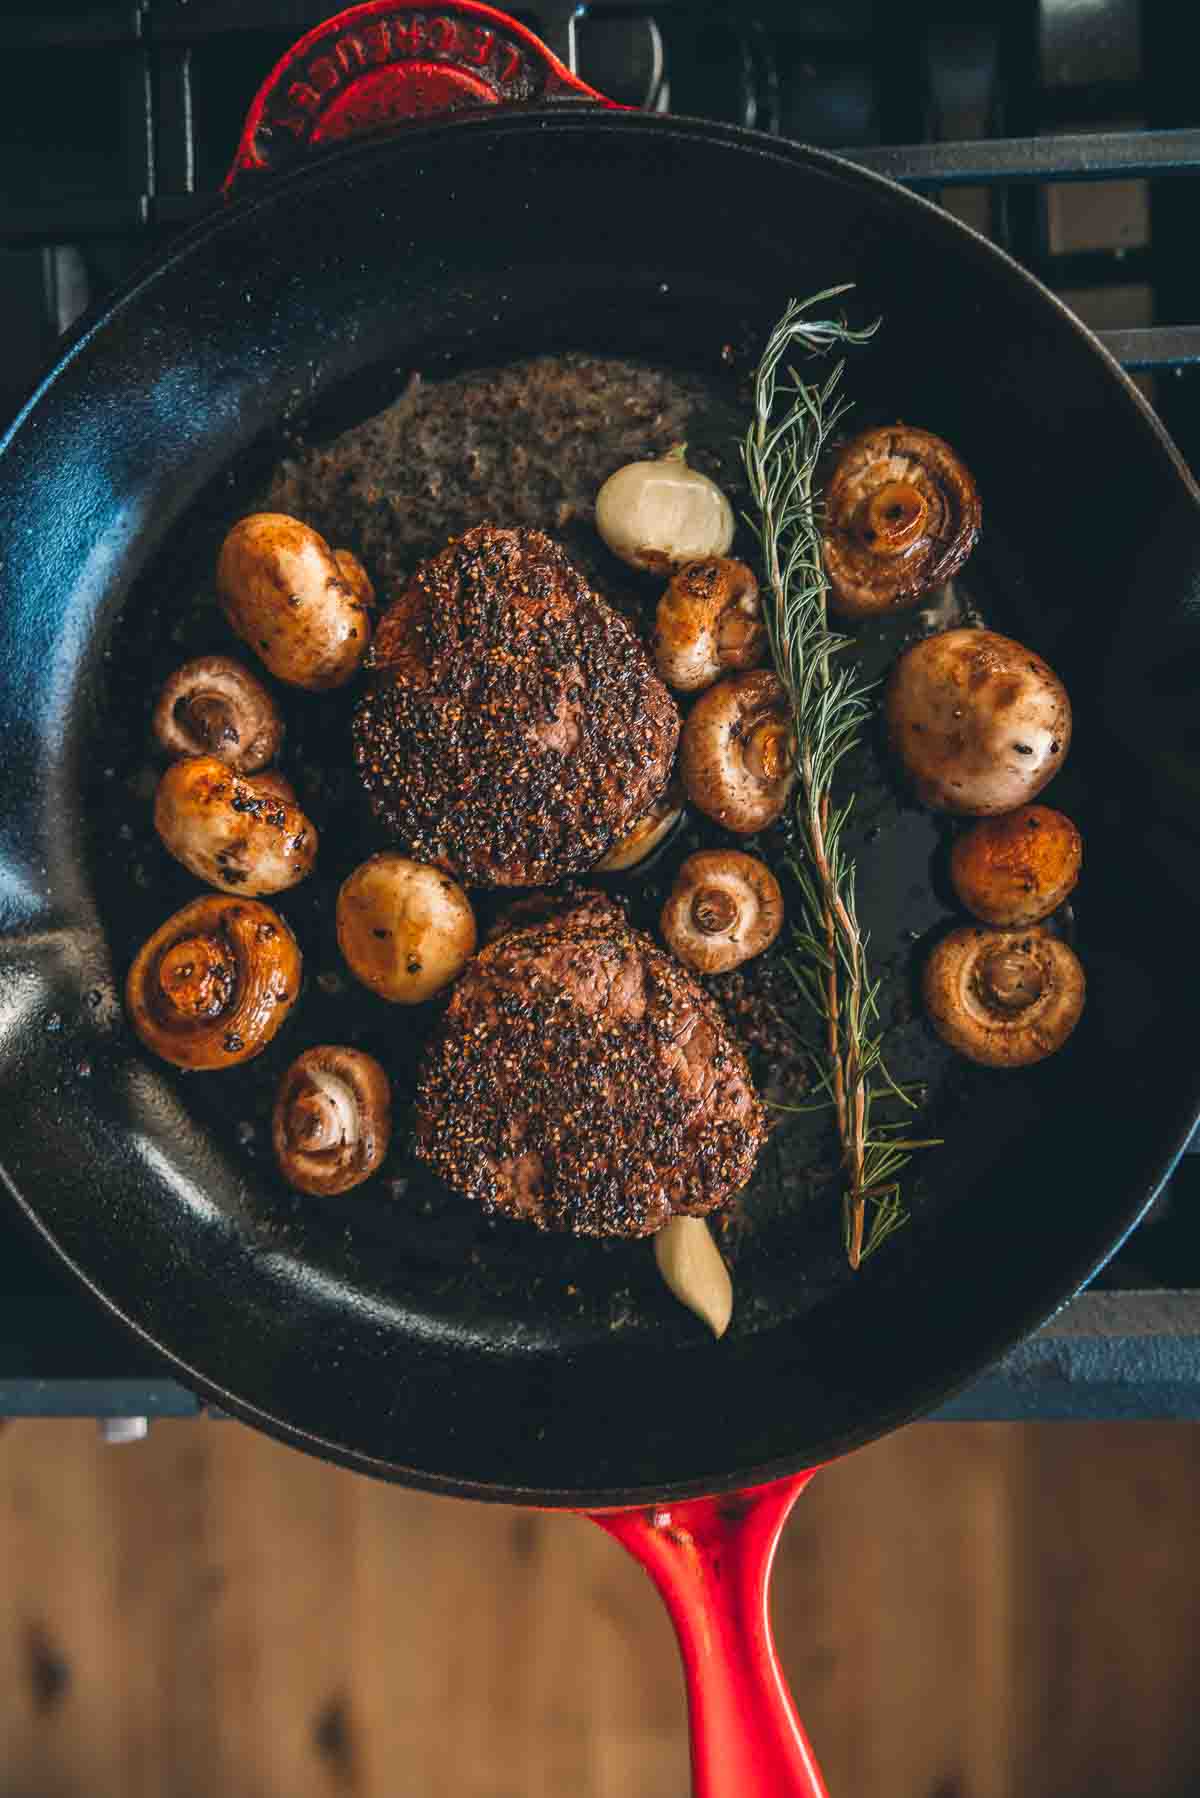 Seared filets in a skillet with mushrooms, butter, rosemary and garlic. 